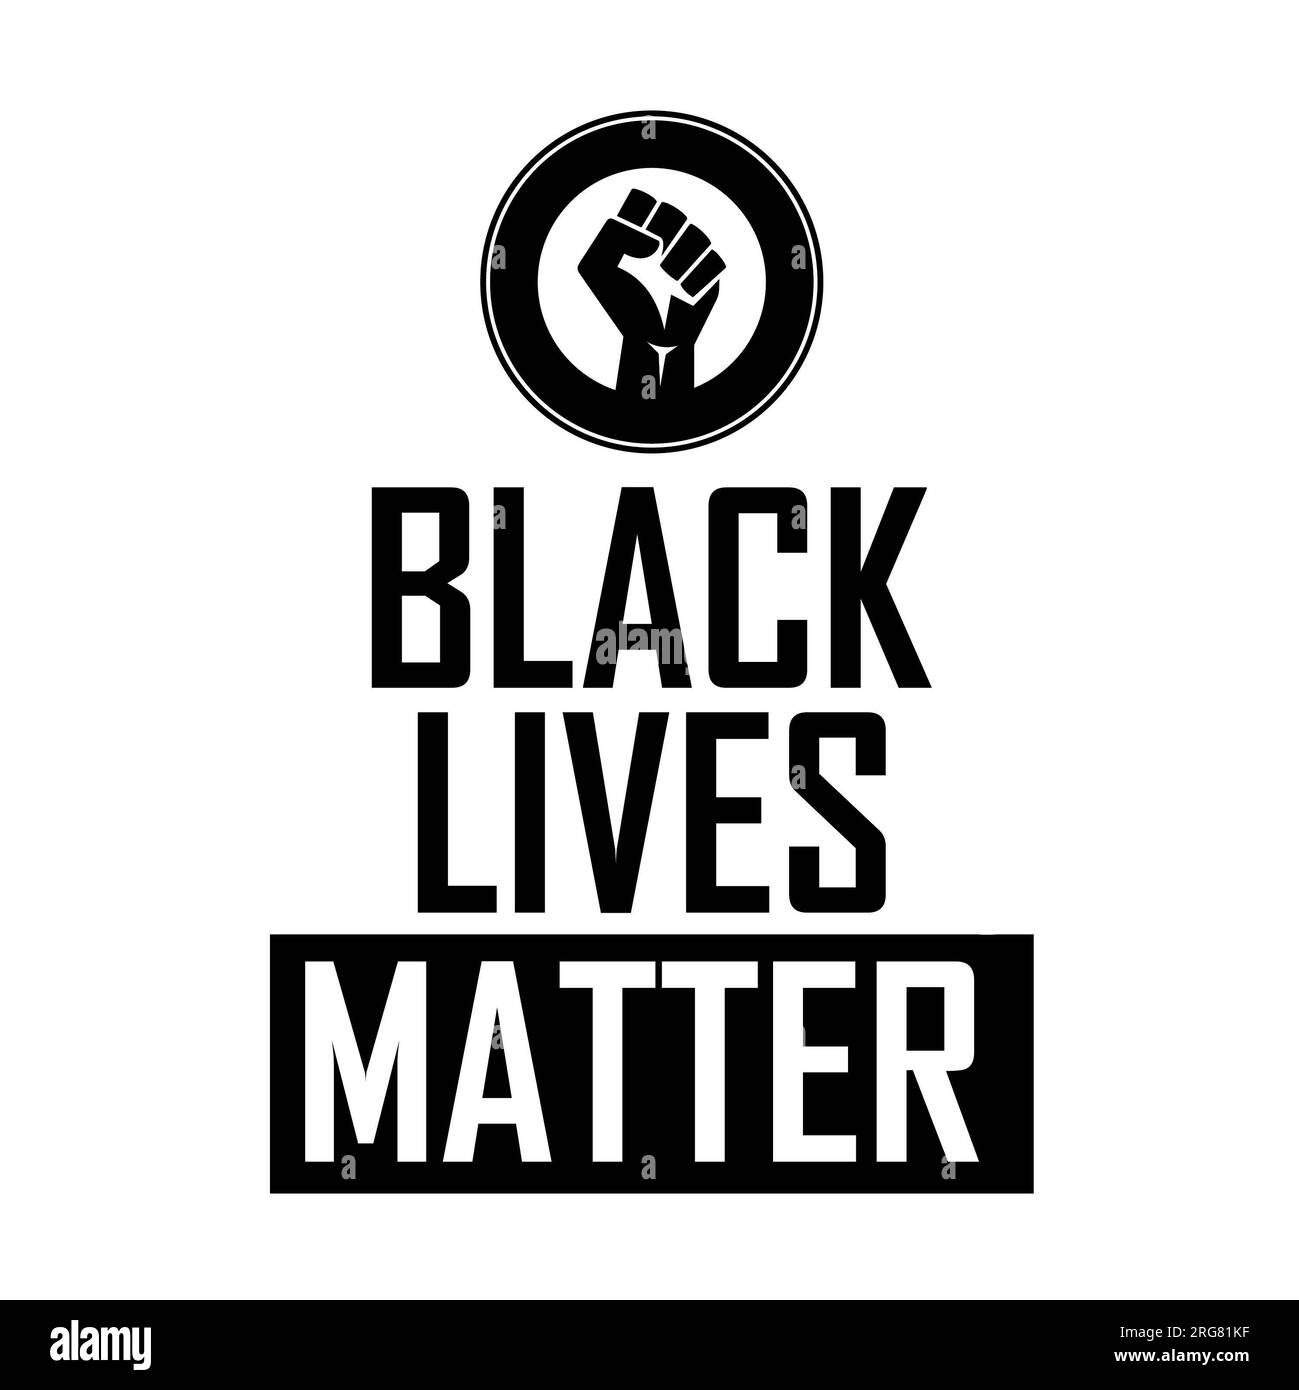 Black lives matter with rising fist on white background. Isolated illustration. Stock Photo